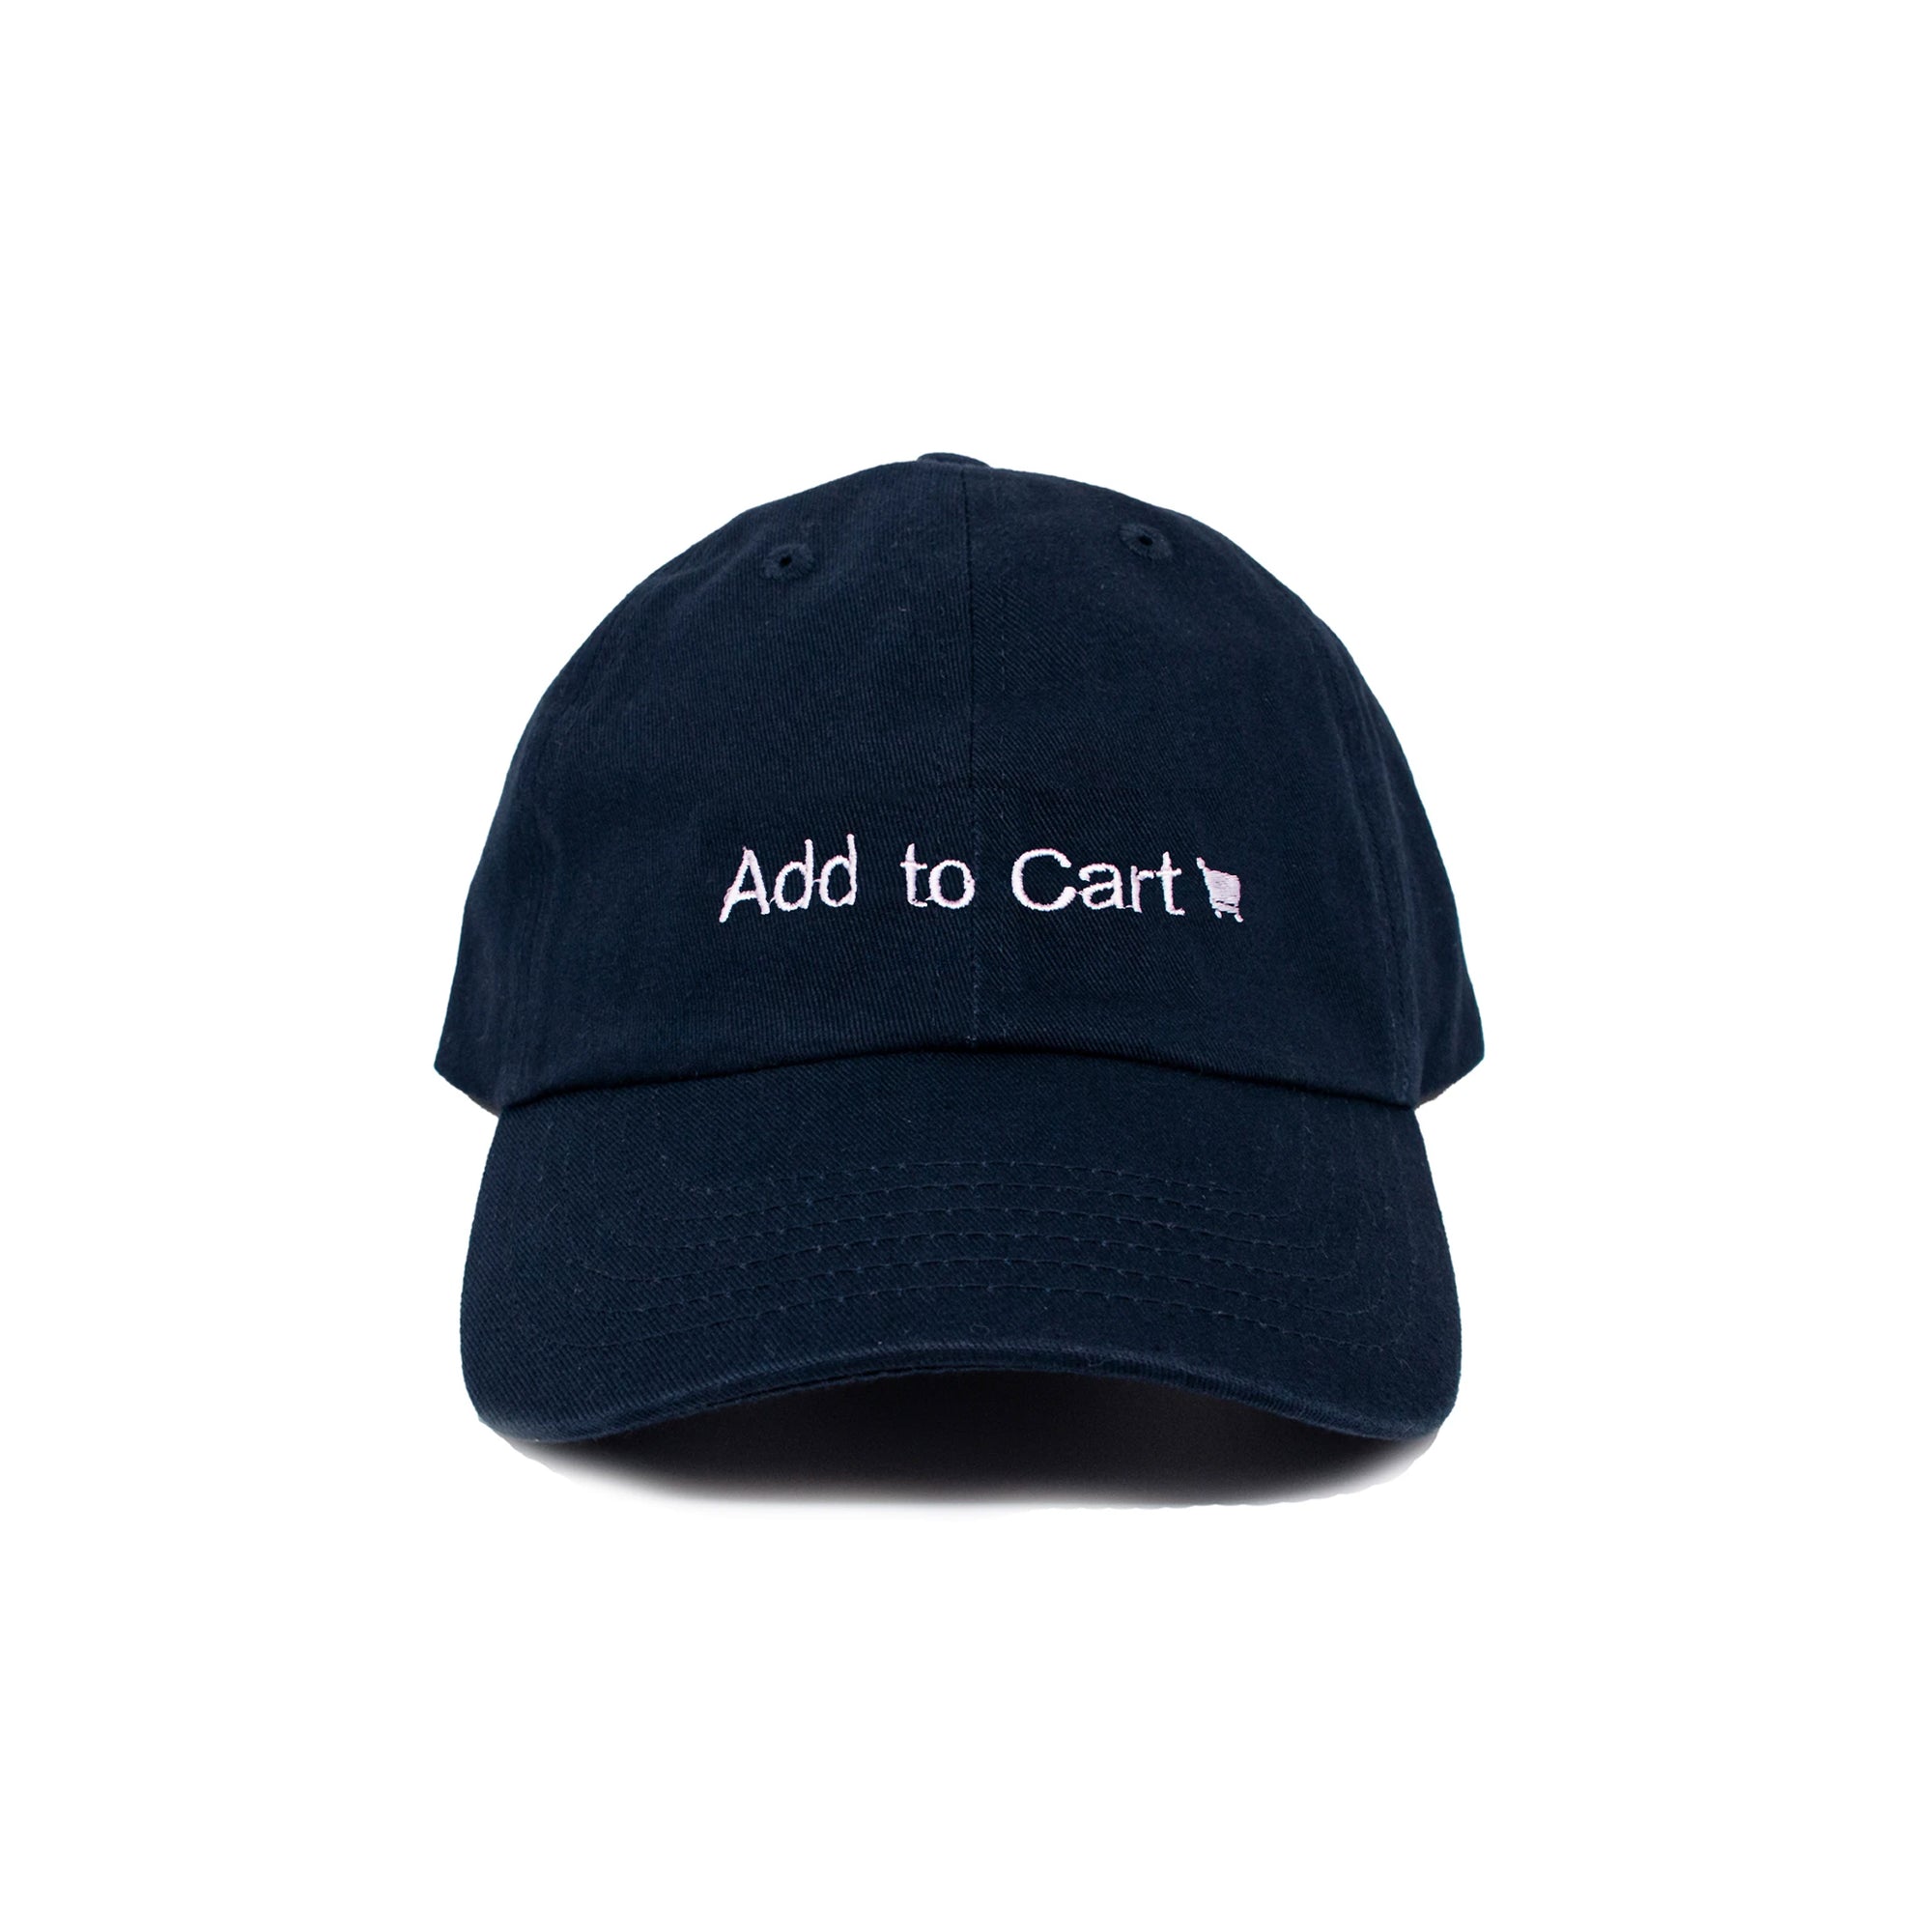 ADD TO CART